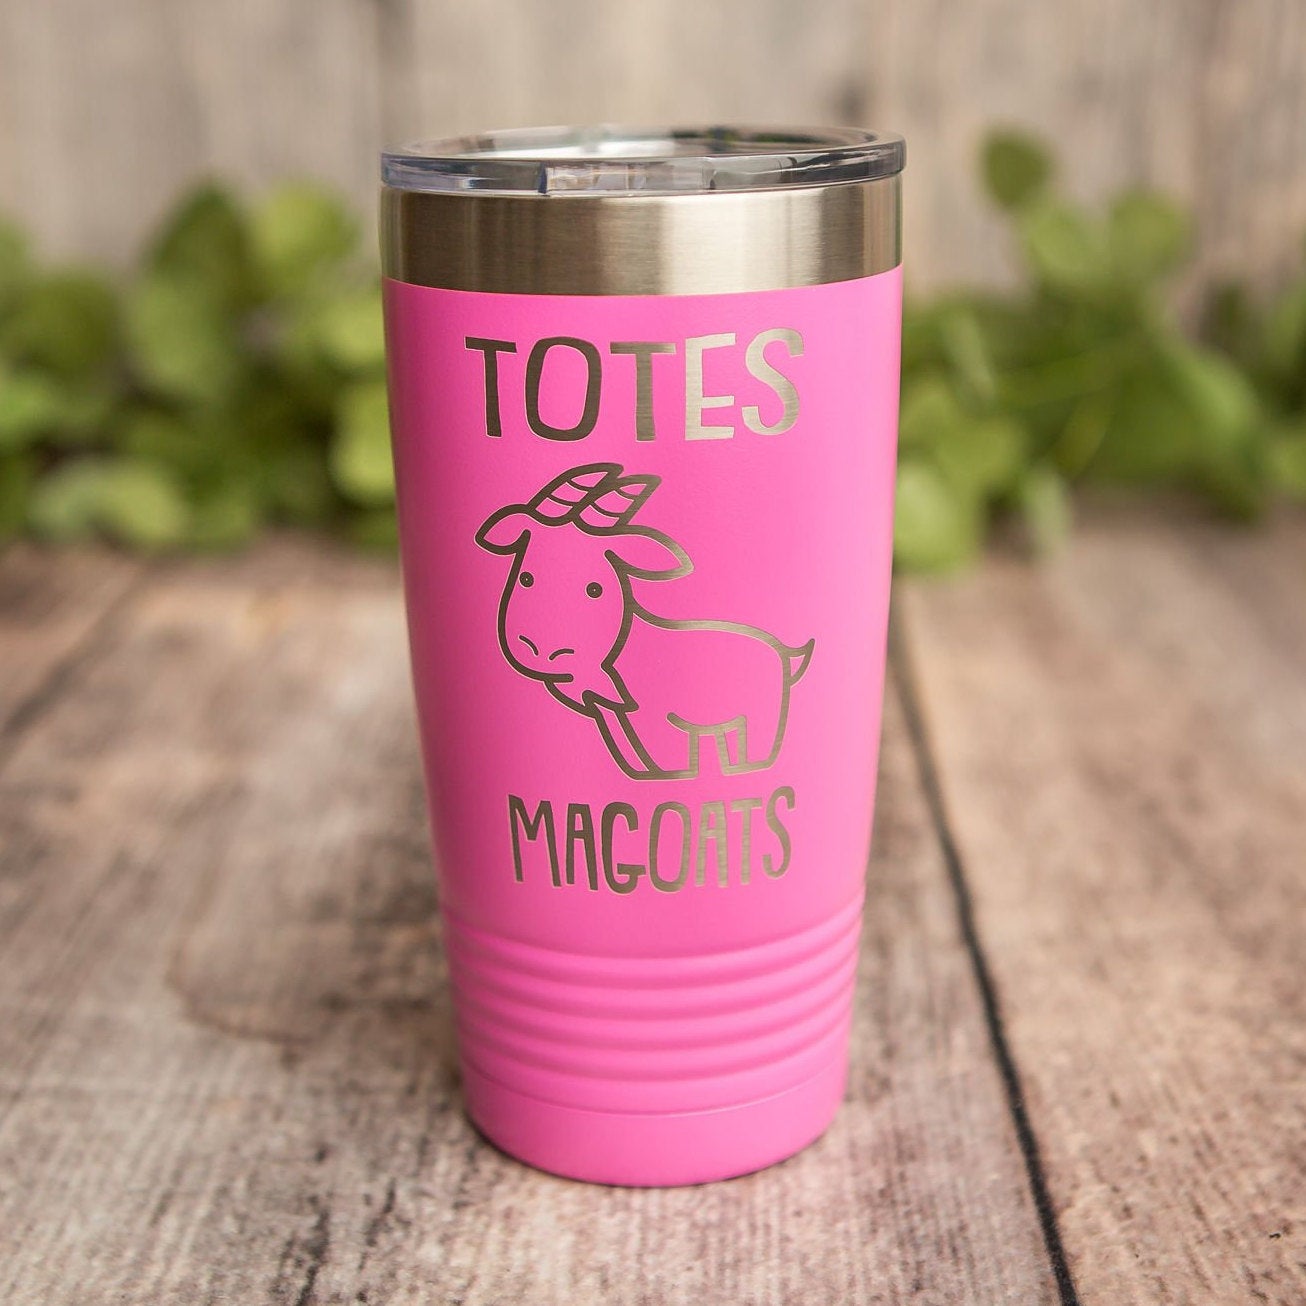 https://3cetching.com/wp-content/uploads/2020/09/totes-magoats-engraved-stainless-steel-tumbler-yeti-style-cup-gifts-for-her-5f5fc9dc.jpg